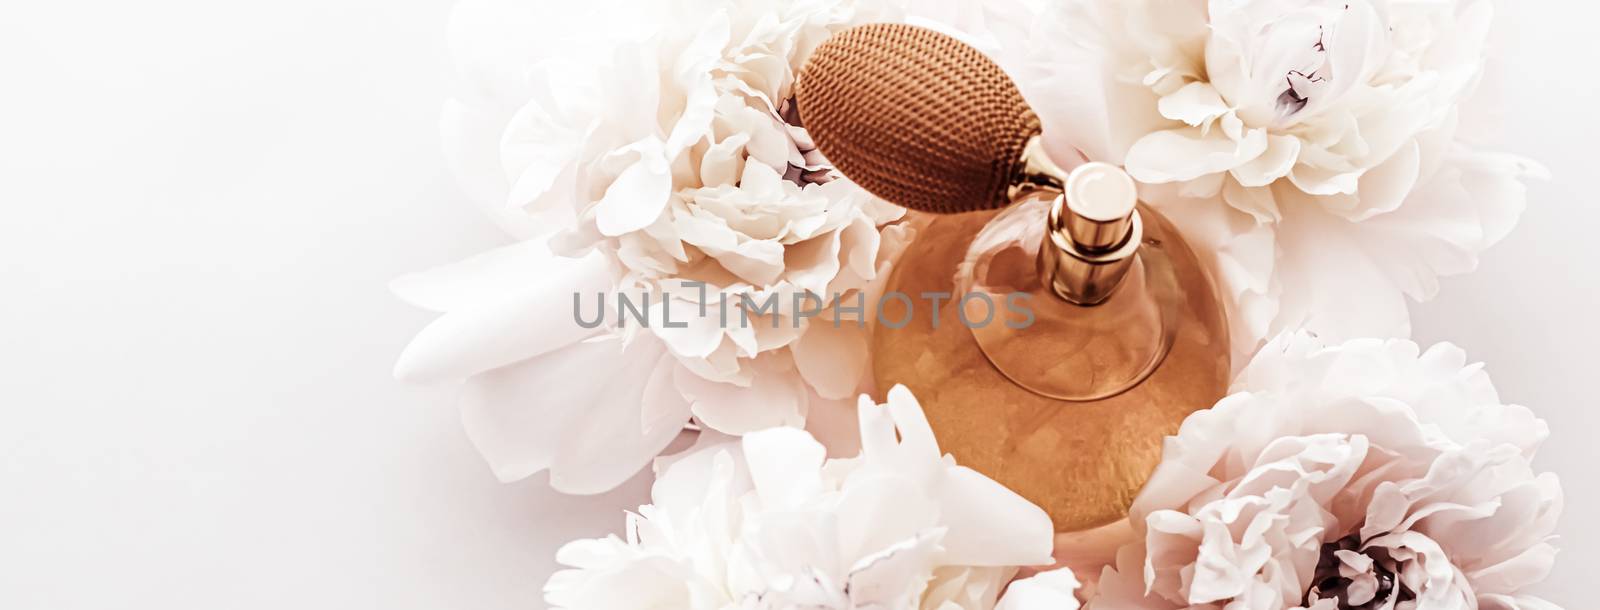 Fragrance bottle as vintage perfume product on background of peony flowers, parfum ad and beauty branding by Anneleven